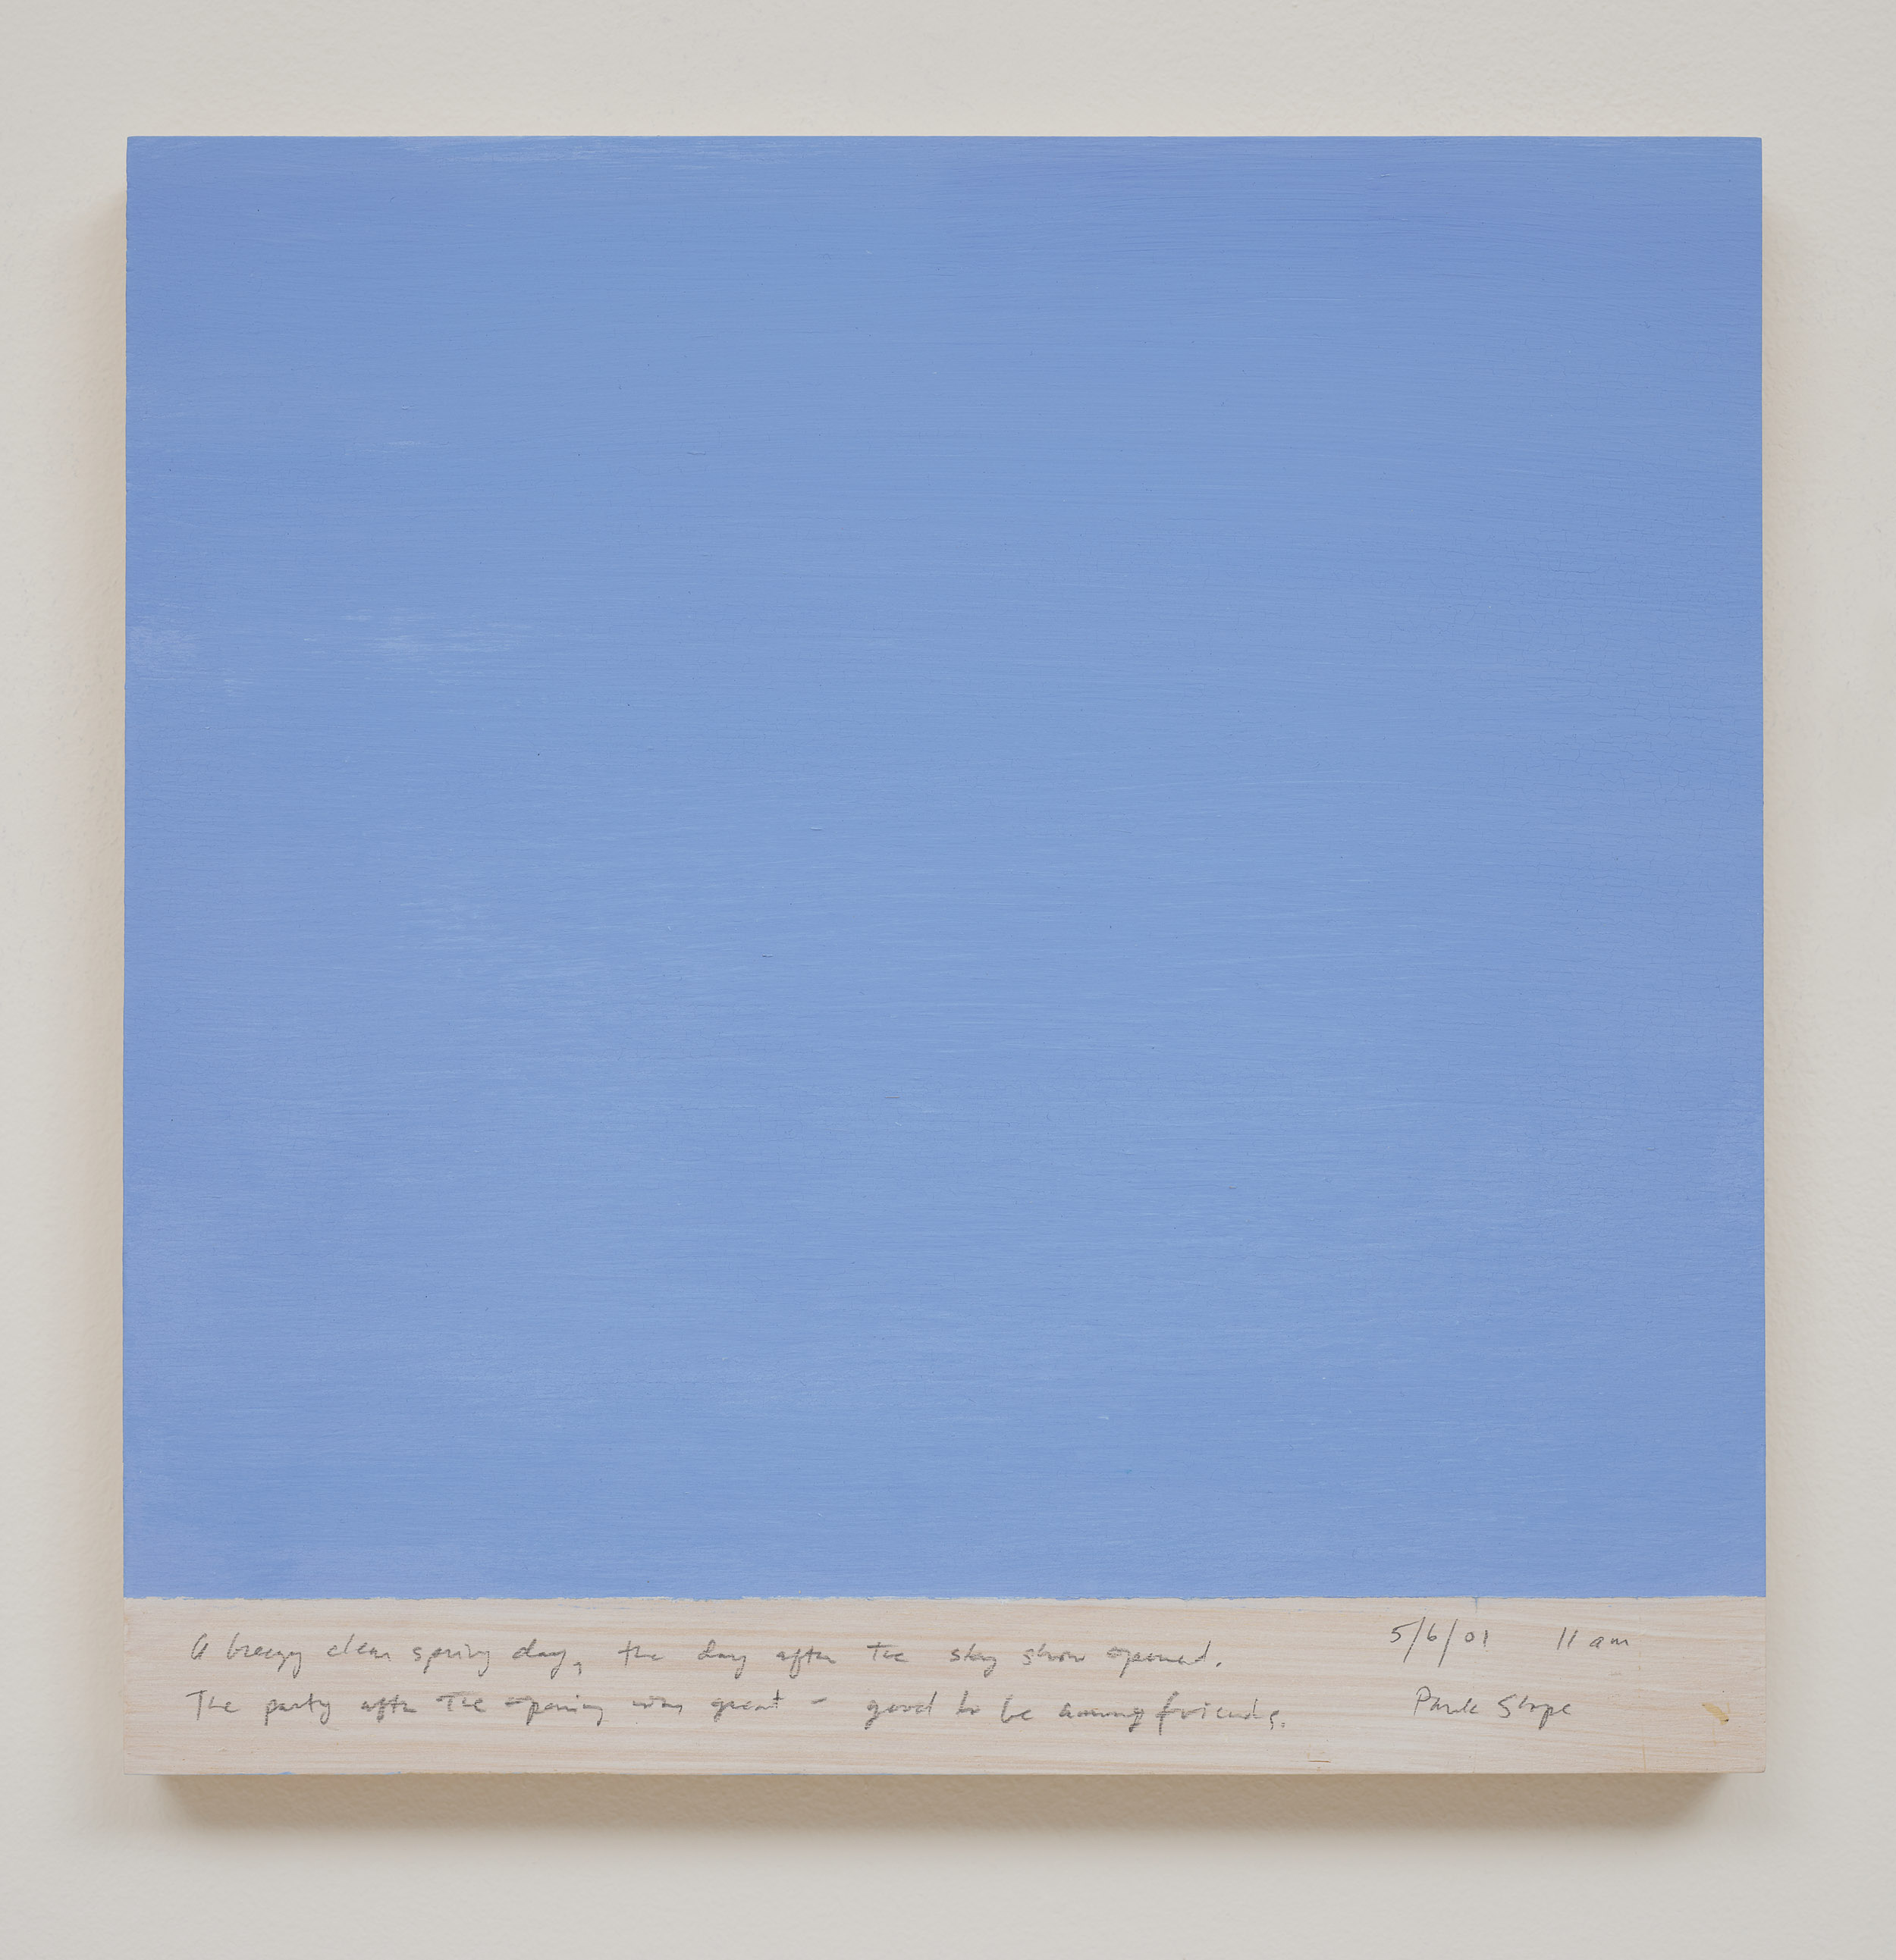 A 14 × 14 inch, acrylic painting of the sky. A journal entry is handwritten on the painting:

“A breezy clear spring day, the day after the sky show opened. The part after the opening was great – good to be among friends.

5/6/01 11am
Park Slope”